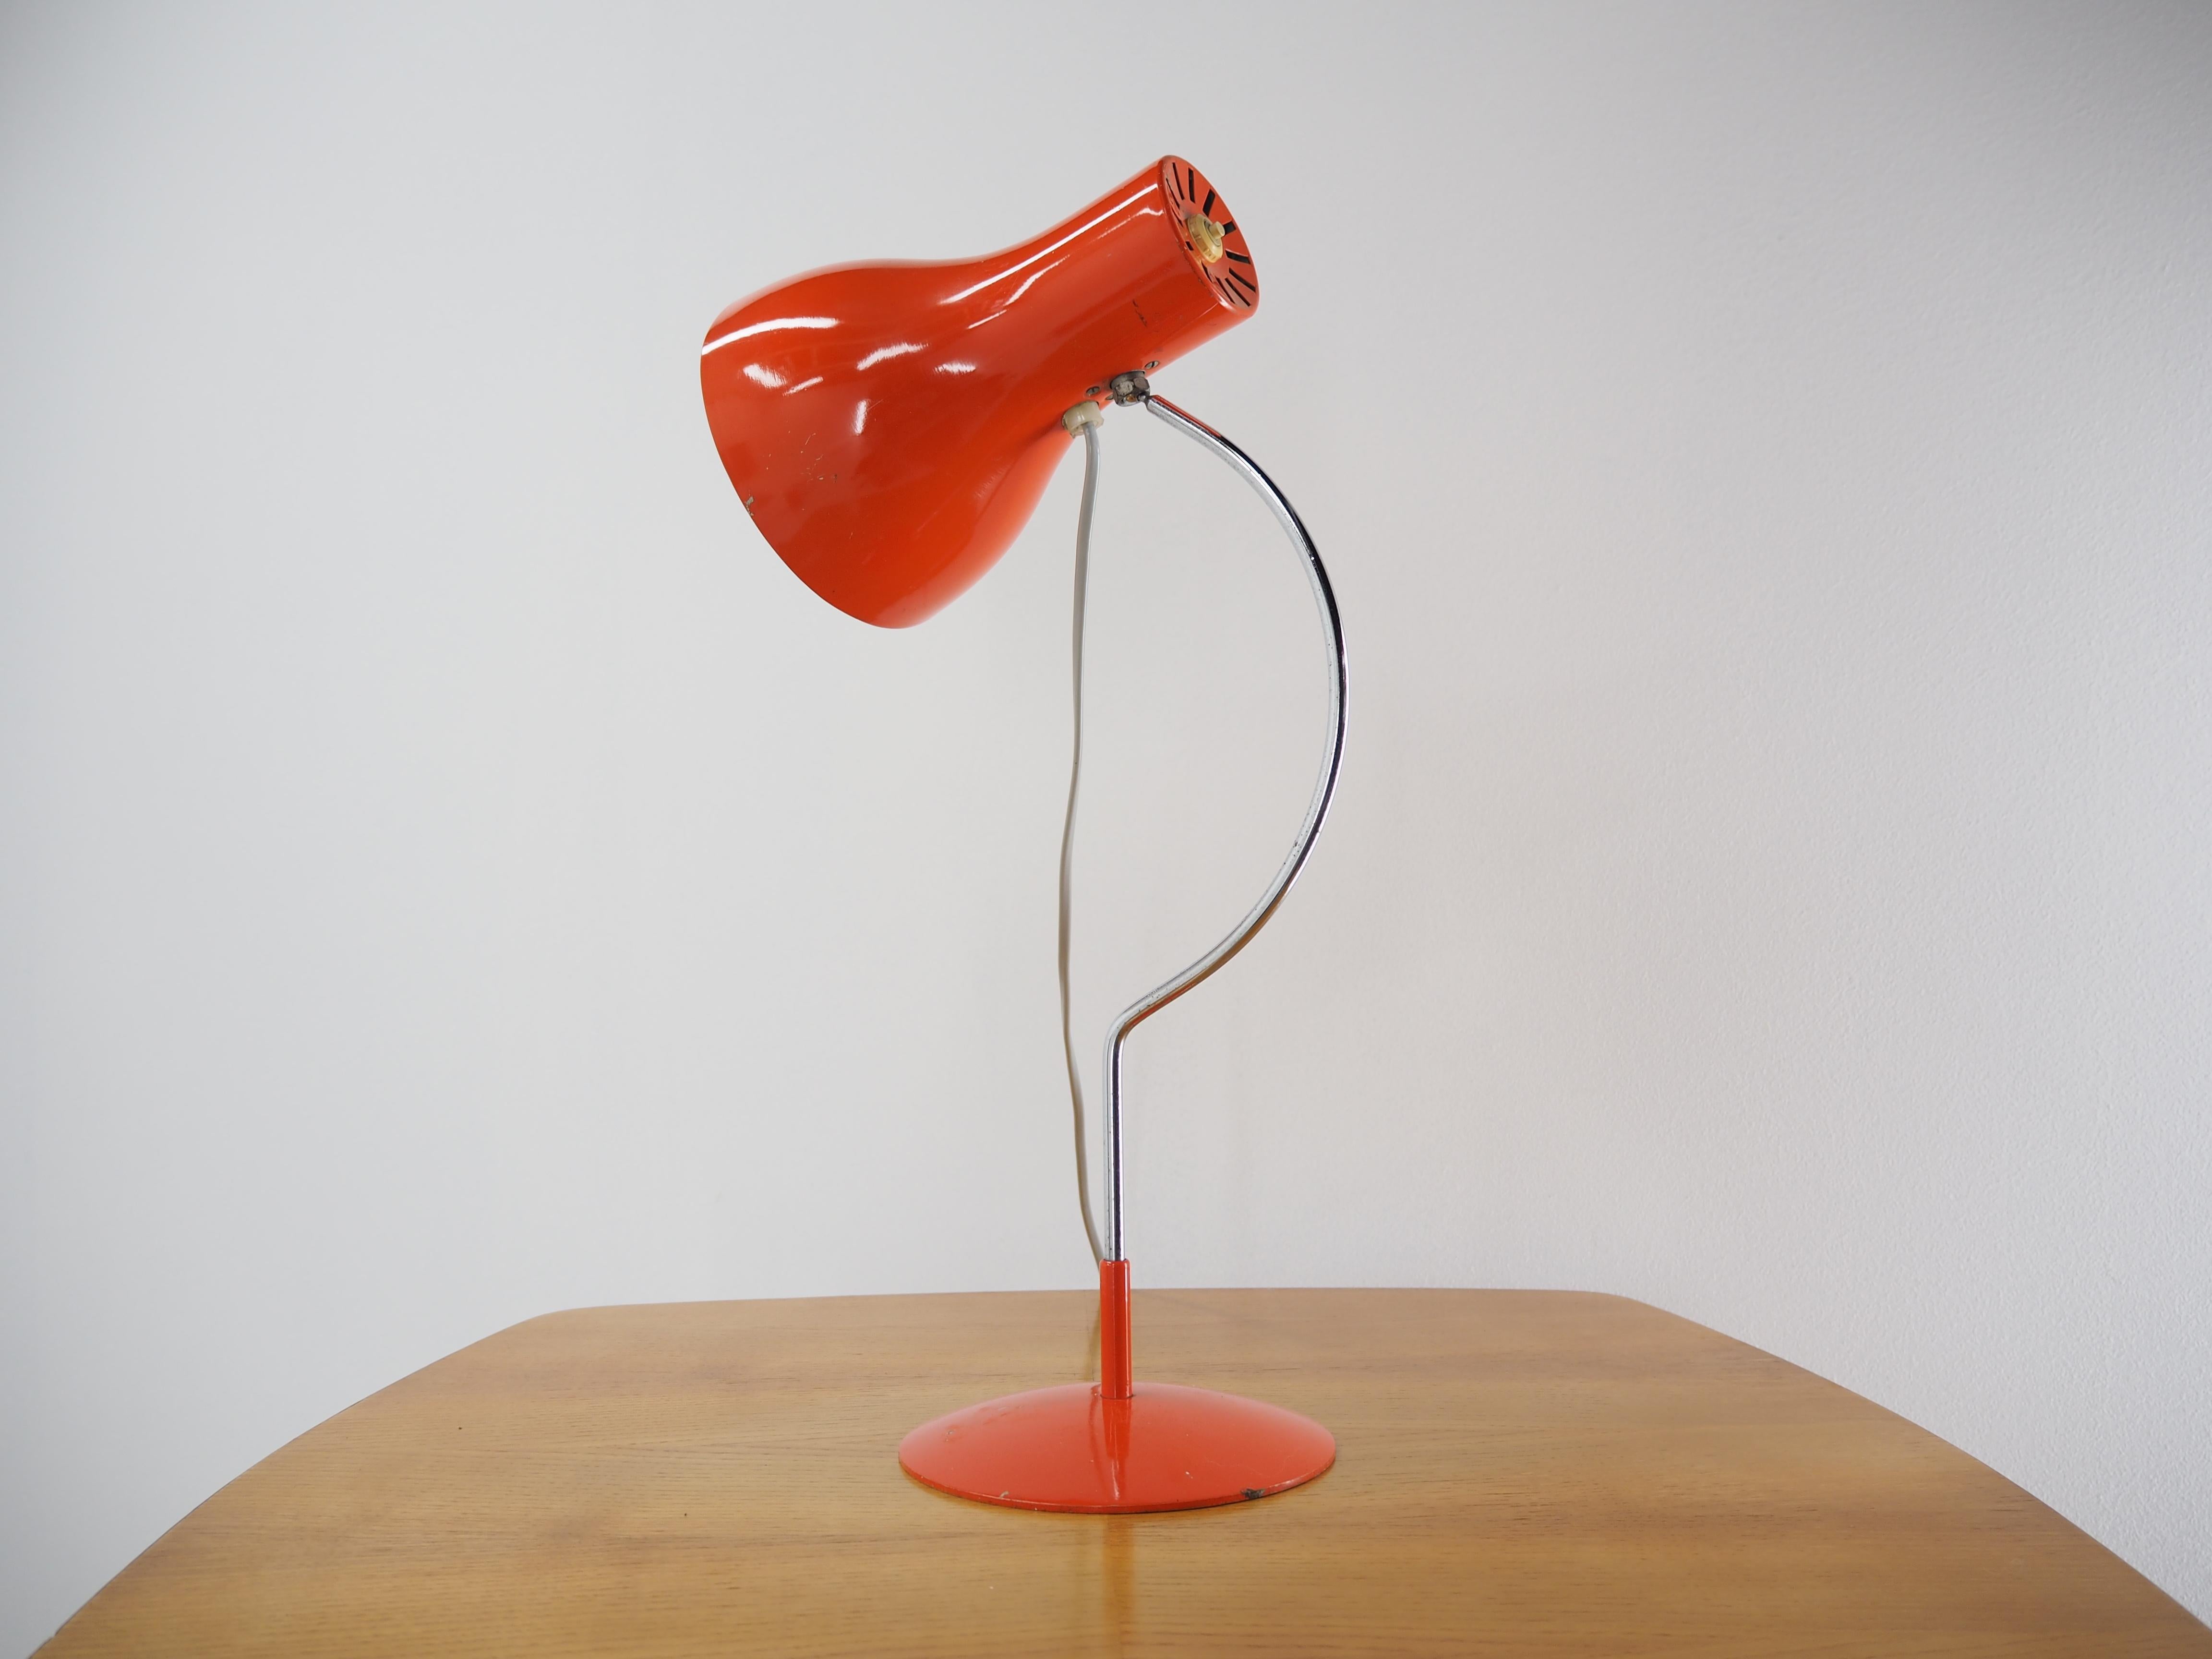 Mid-Century Modern Midcentury Table Lamp Designed by J. Hurka for Napako 1970s type 0521